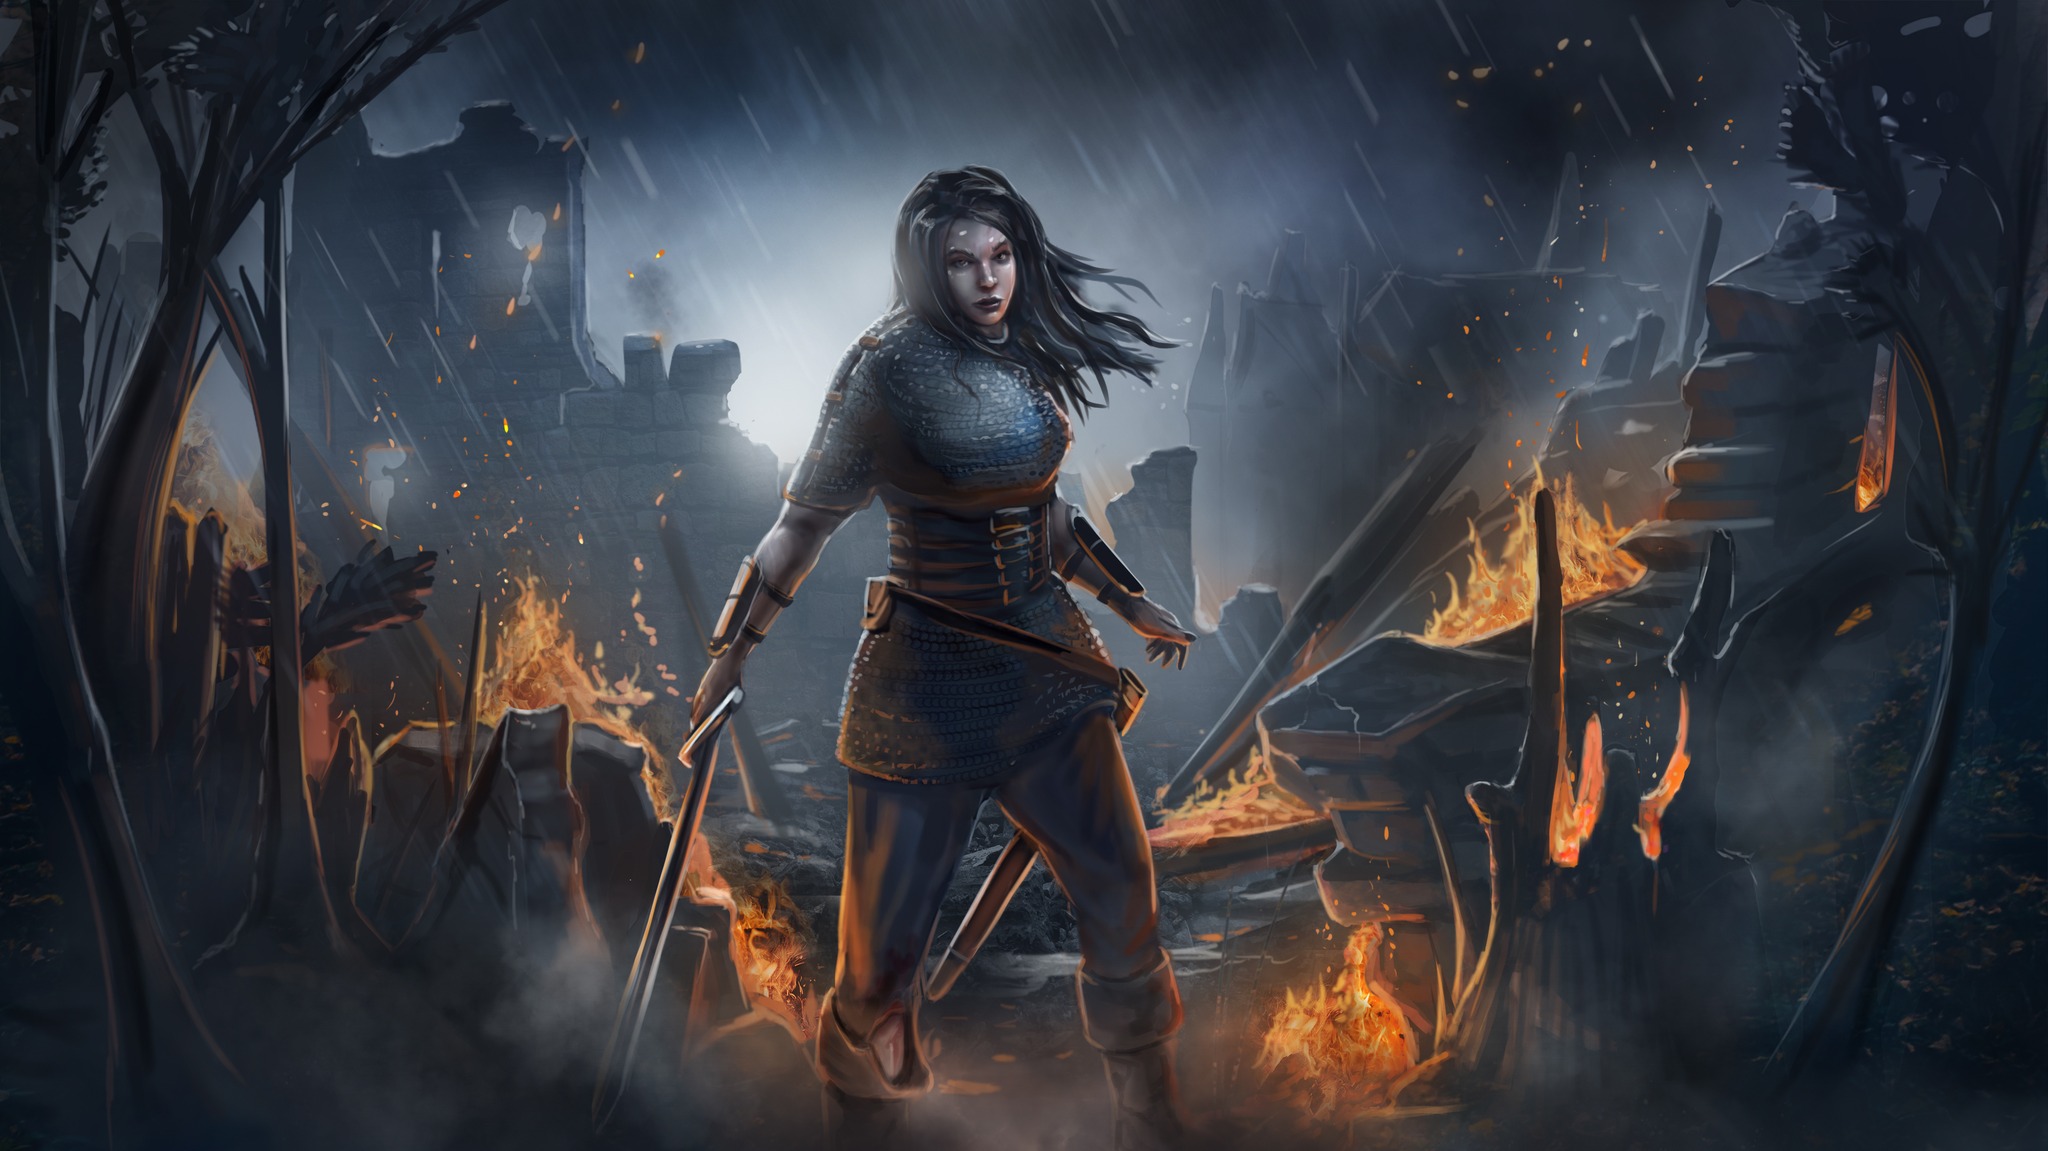 A fantasy artwork of a woman standing surrounded by fire, sword in her hand. She has magic she doesn't quite understand.